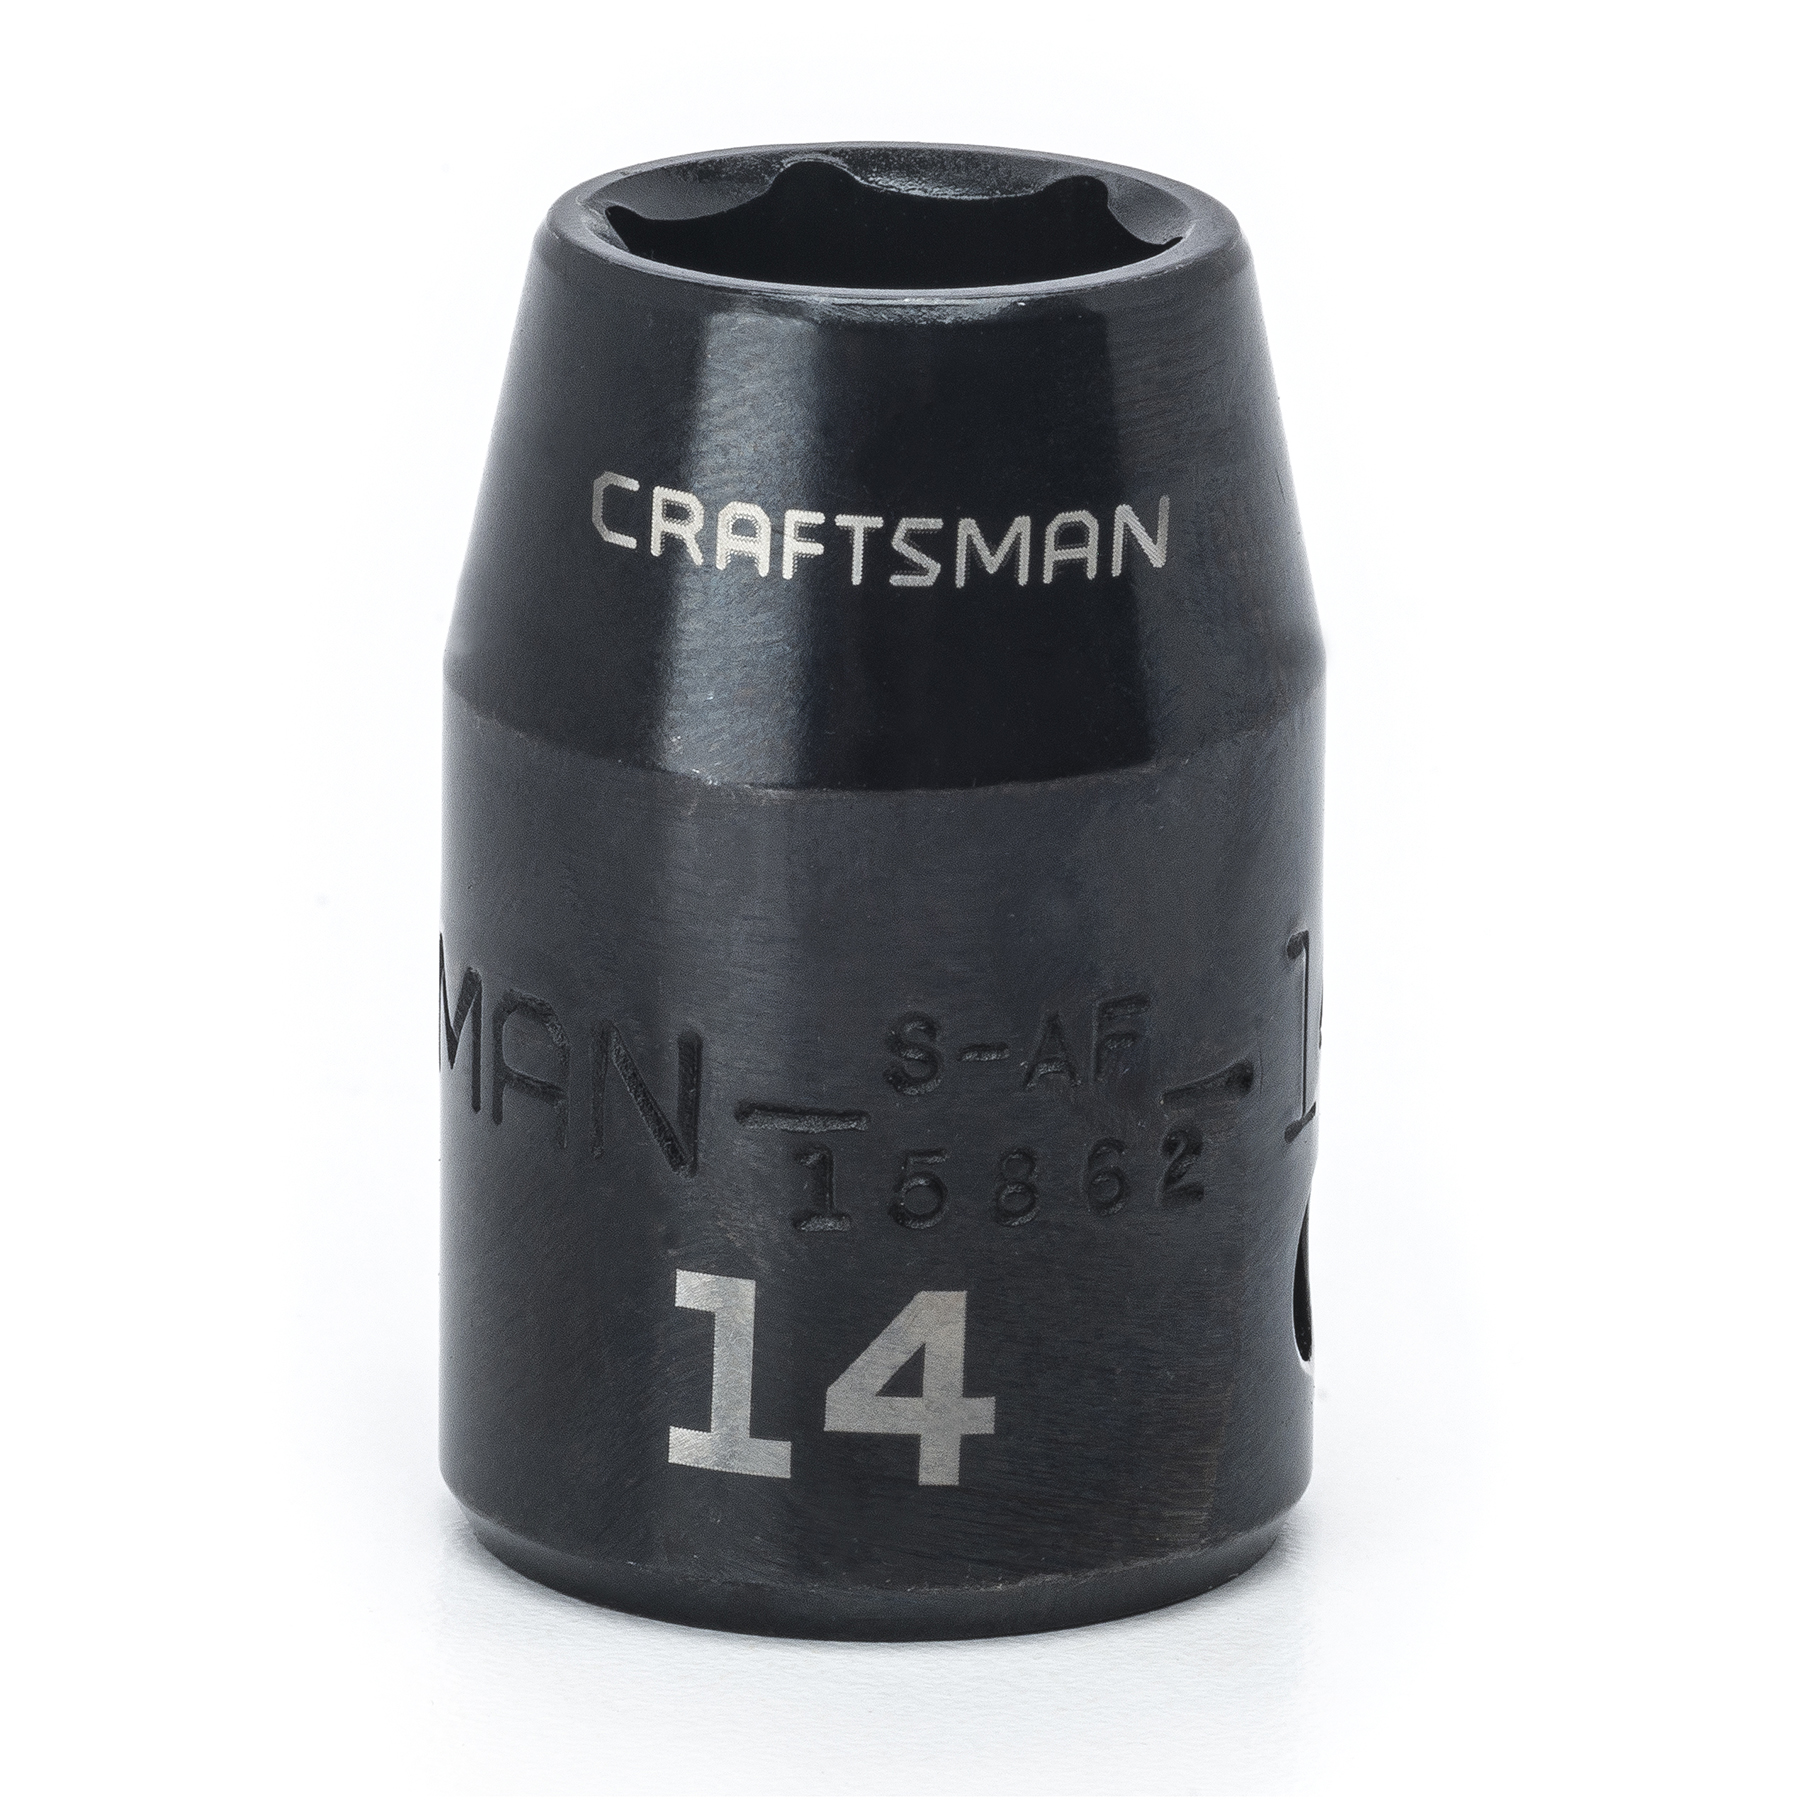 Craftsman 14mm Easy-To-Read Impact Socket 6 pt. STD, 1/2 in. drive